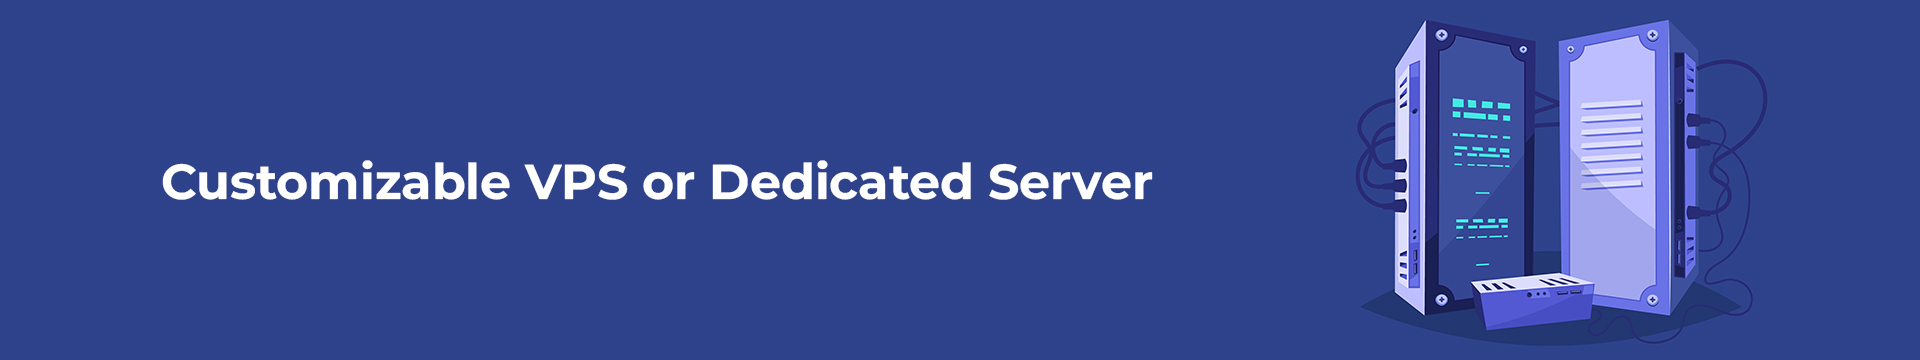 Customizable VPS or Dedicated Server: Comparing the Benefits